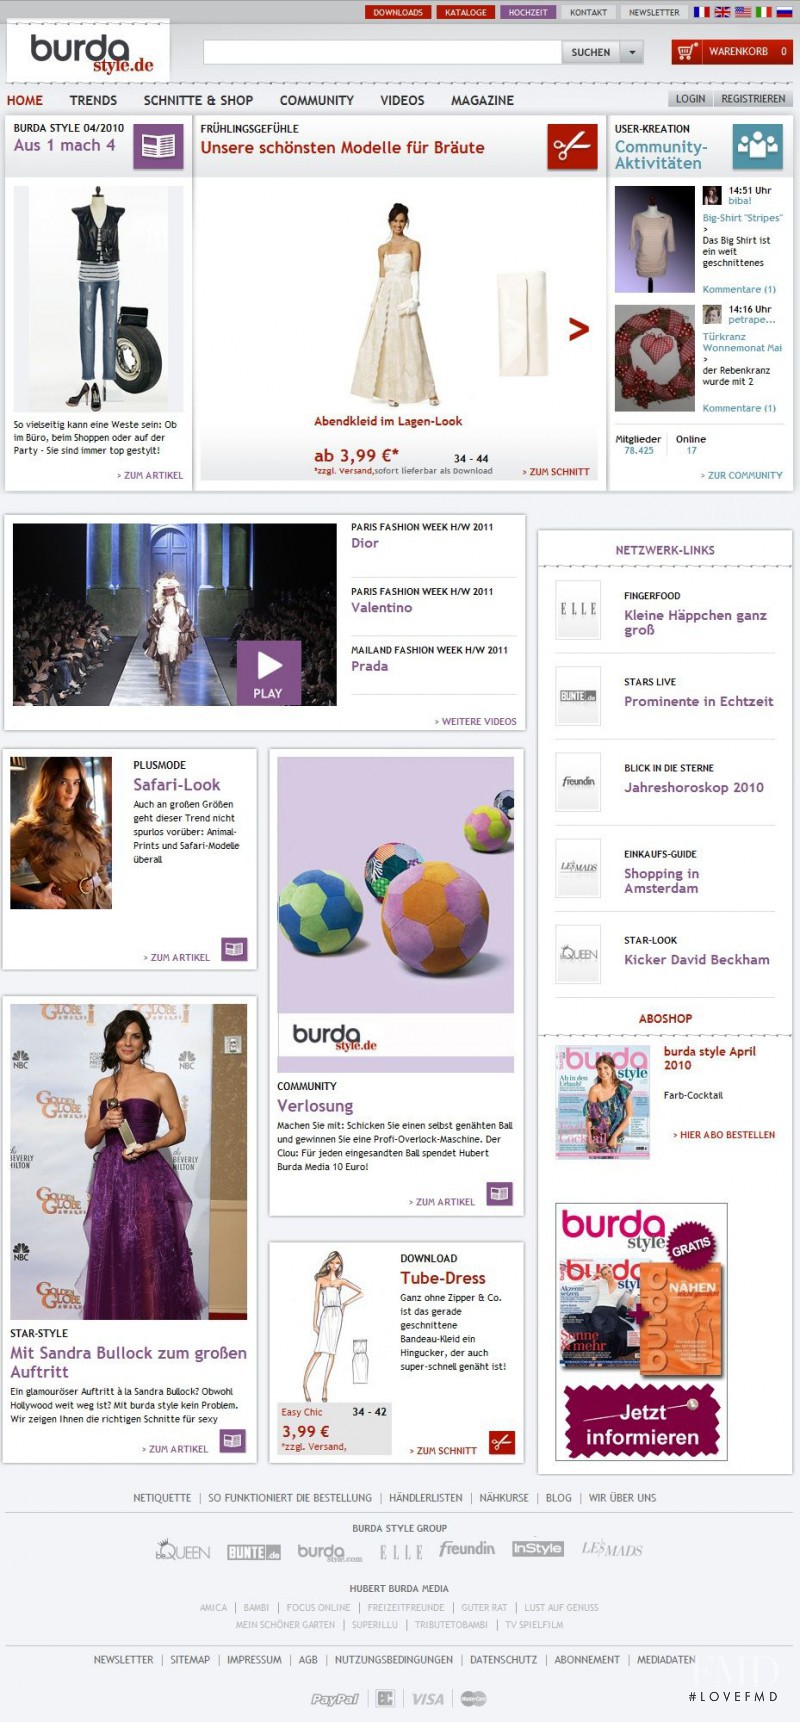  featured on the BurdaStyle.de screen from April 2010